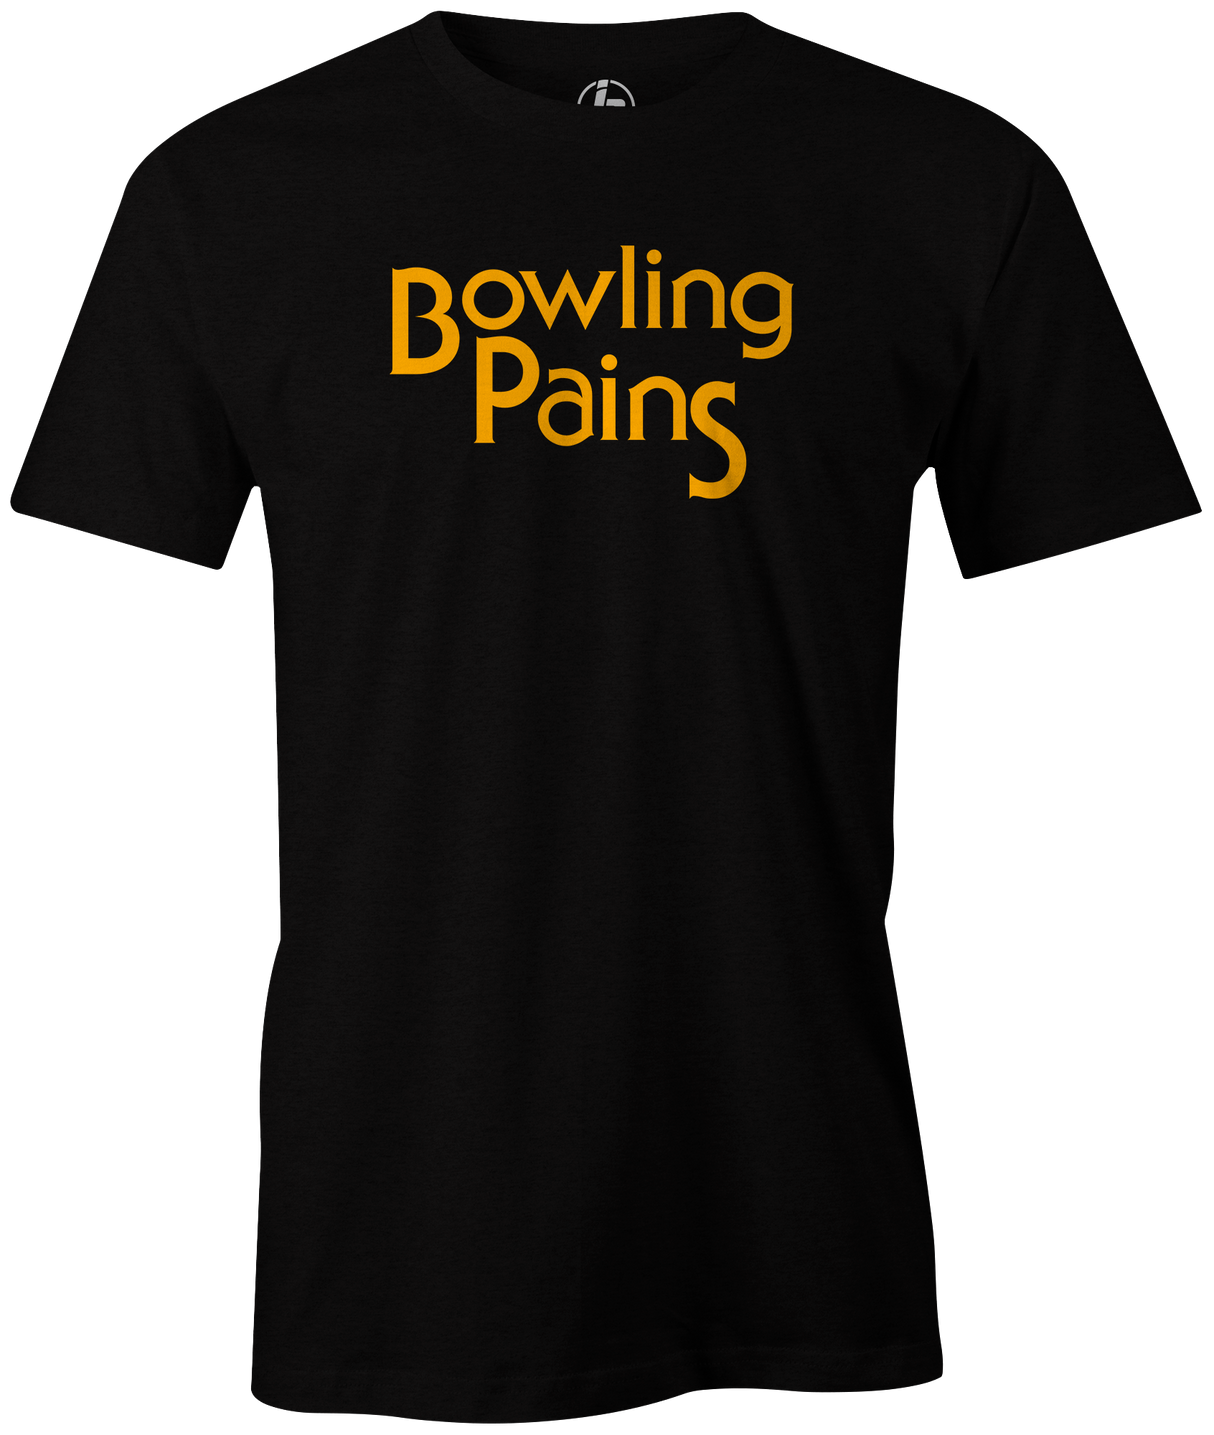 Bowling Pains: we ALL have them!  Growing pains tshirt tee t-shirt. Alan Thicke, joanna kerns, kirk cameron, tracey gold, jeremy miller, ashley johnson, leonardo dicaprio, dr. seaver, mike seaver, carol seaver, luke brower. Bowling League Night Spares Strikes gutter friends family bowler funny novelty tv television 80s 90s teen black